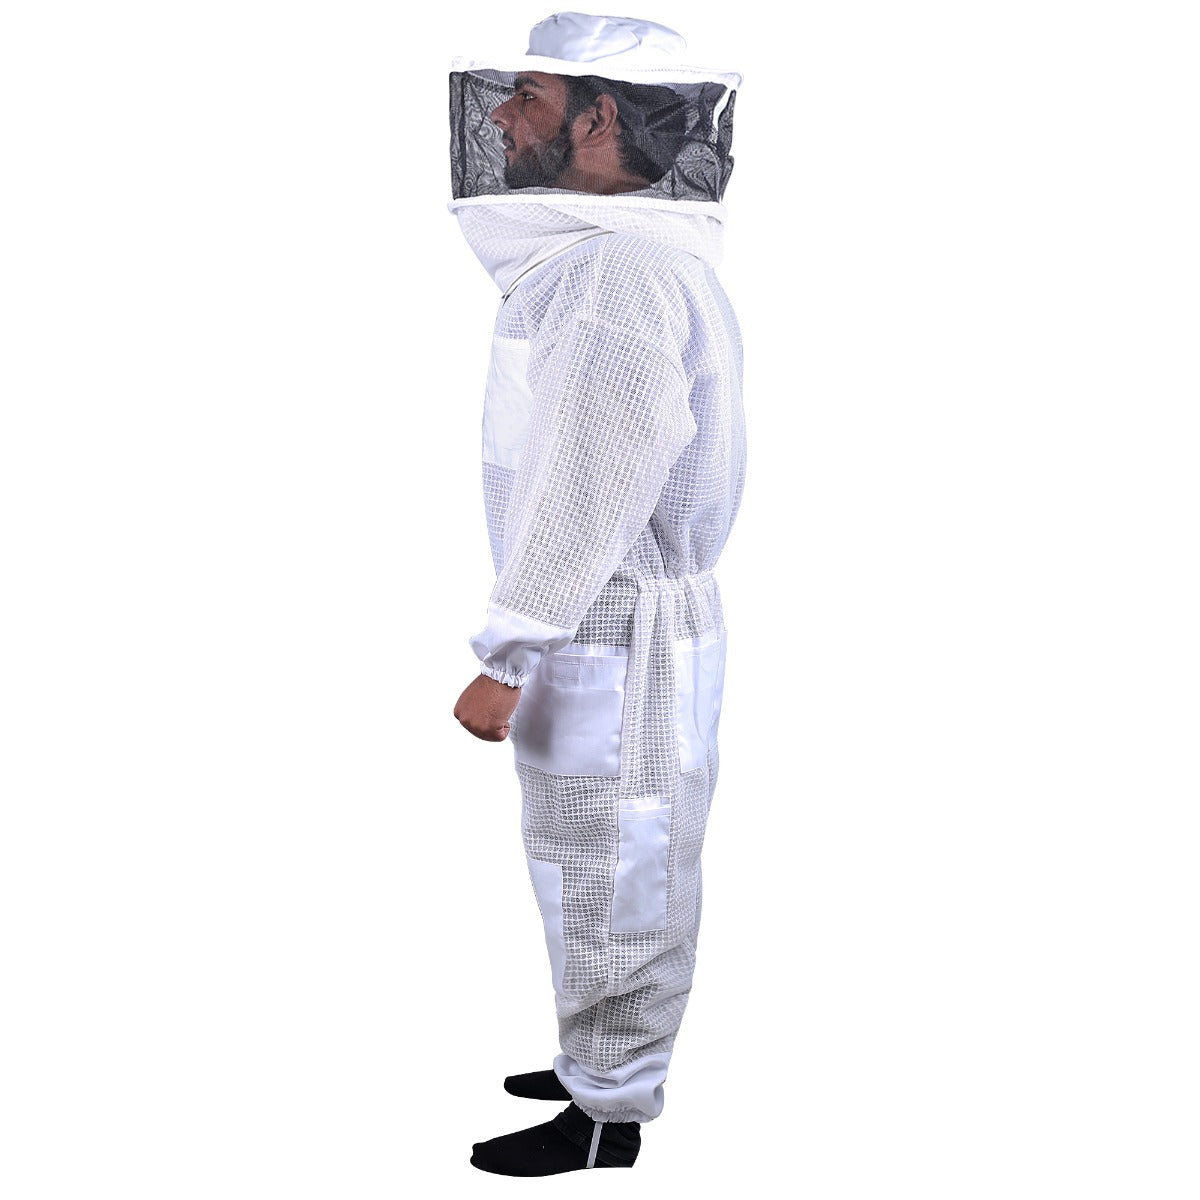 Full Suit 3 Layer Mesh Ultra Cool Ventilated Round Head Beekeeping Size M